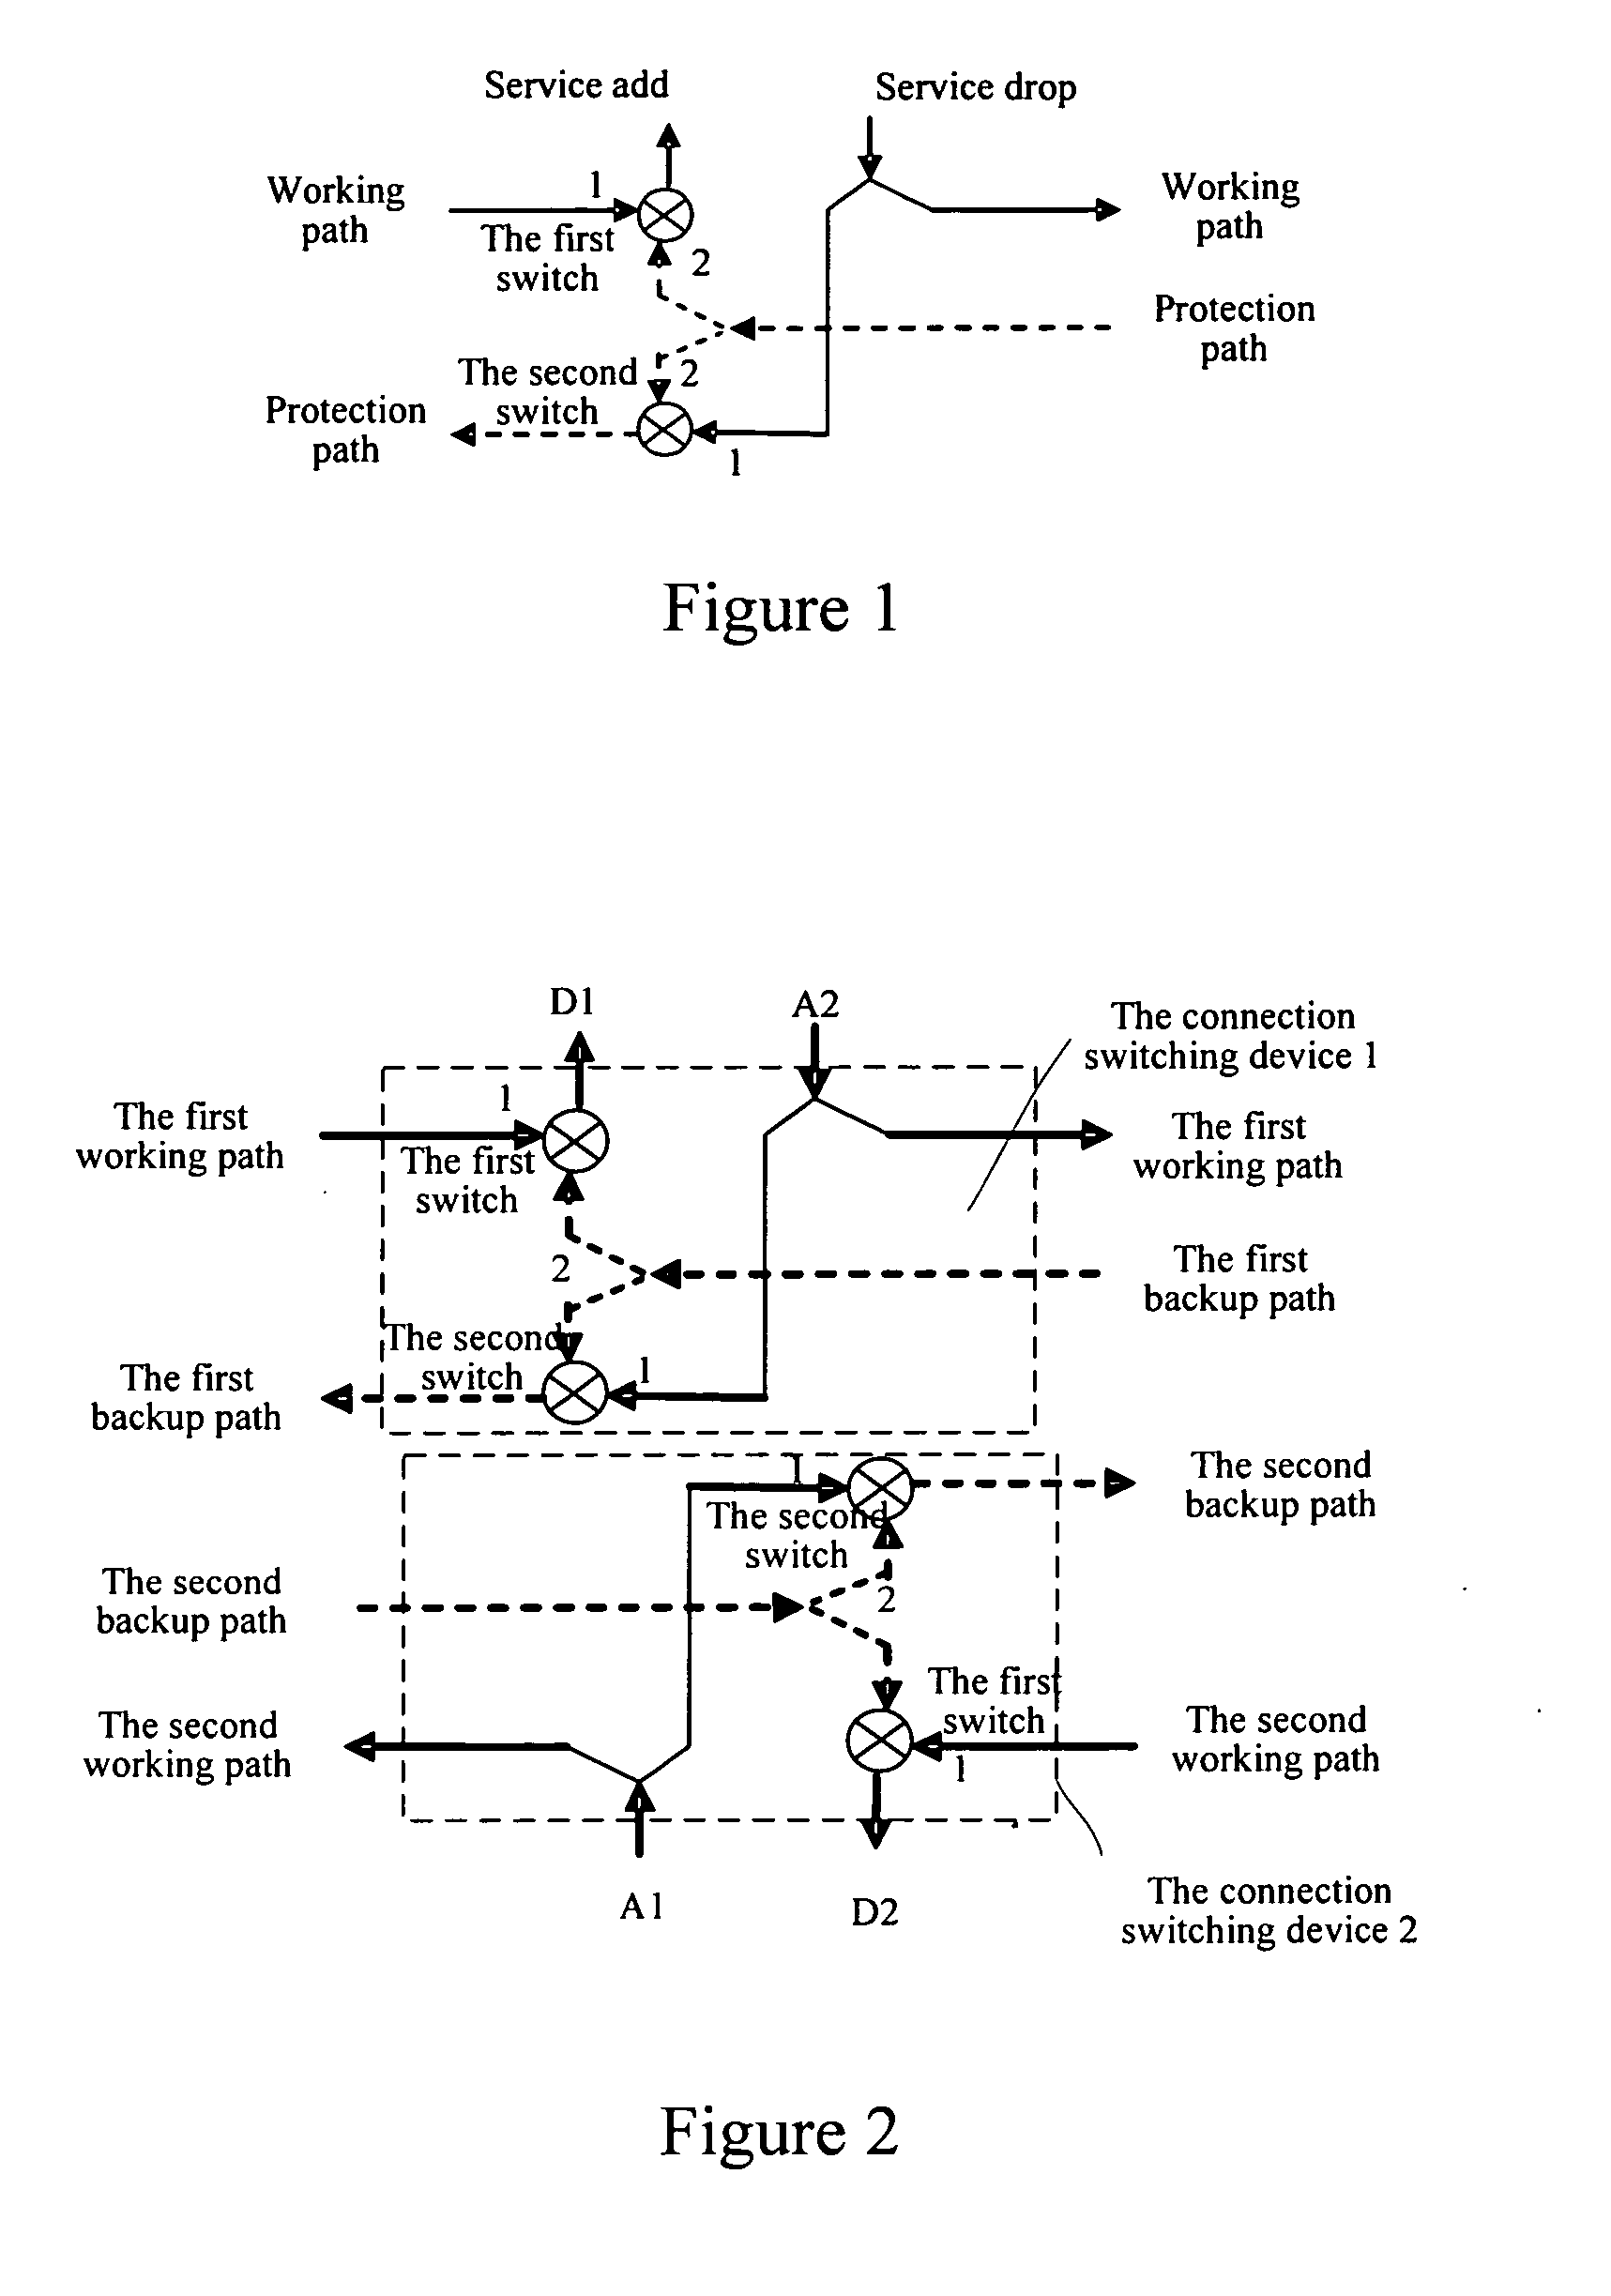 Method and device for implementing och-spring in wavelength division multiplexing systems